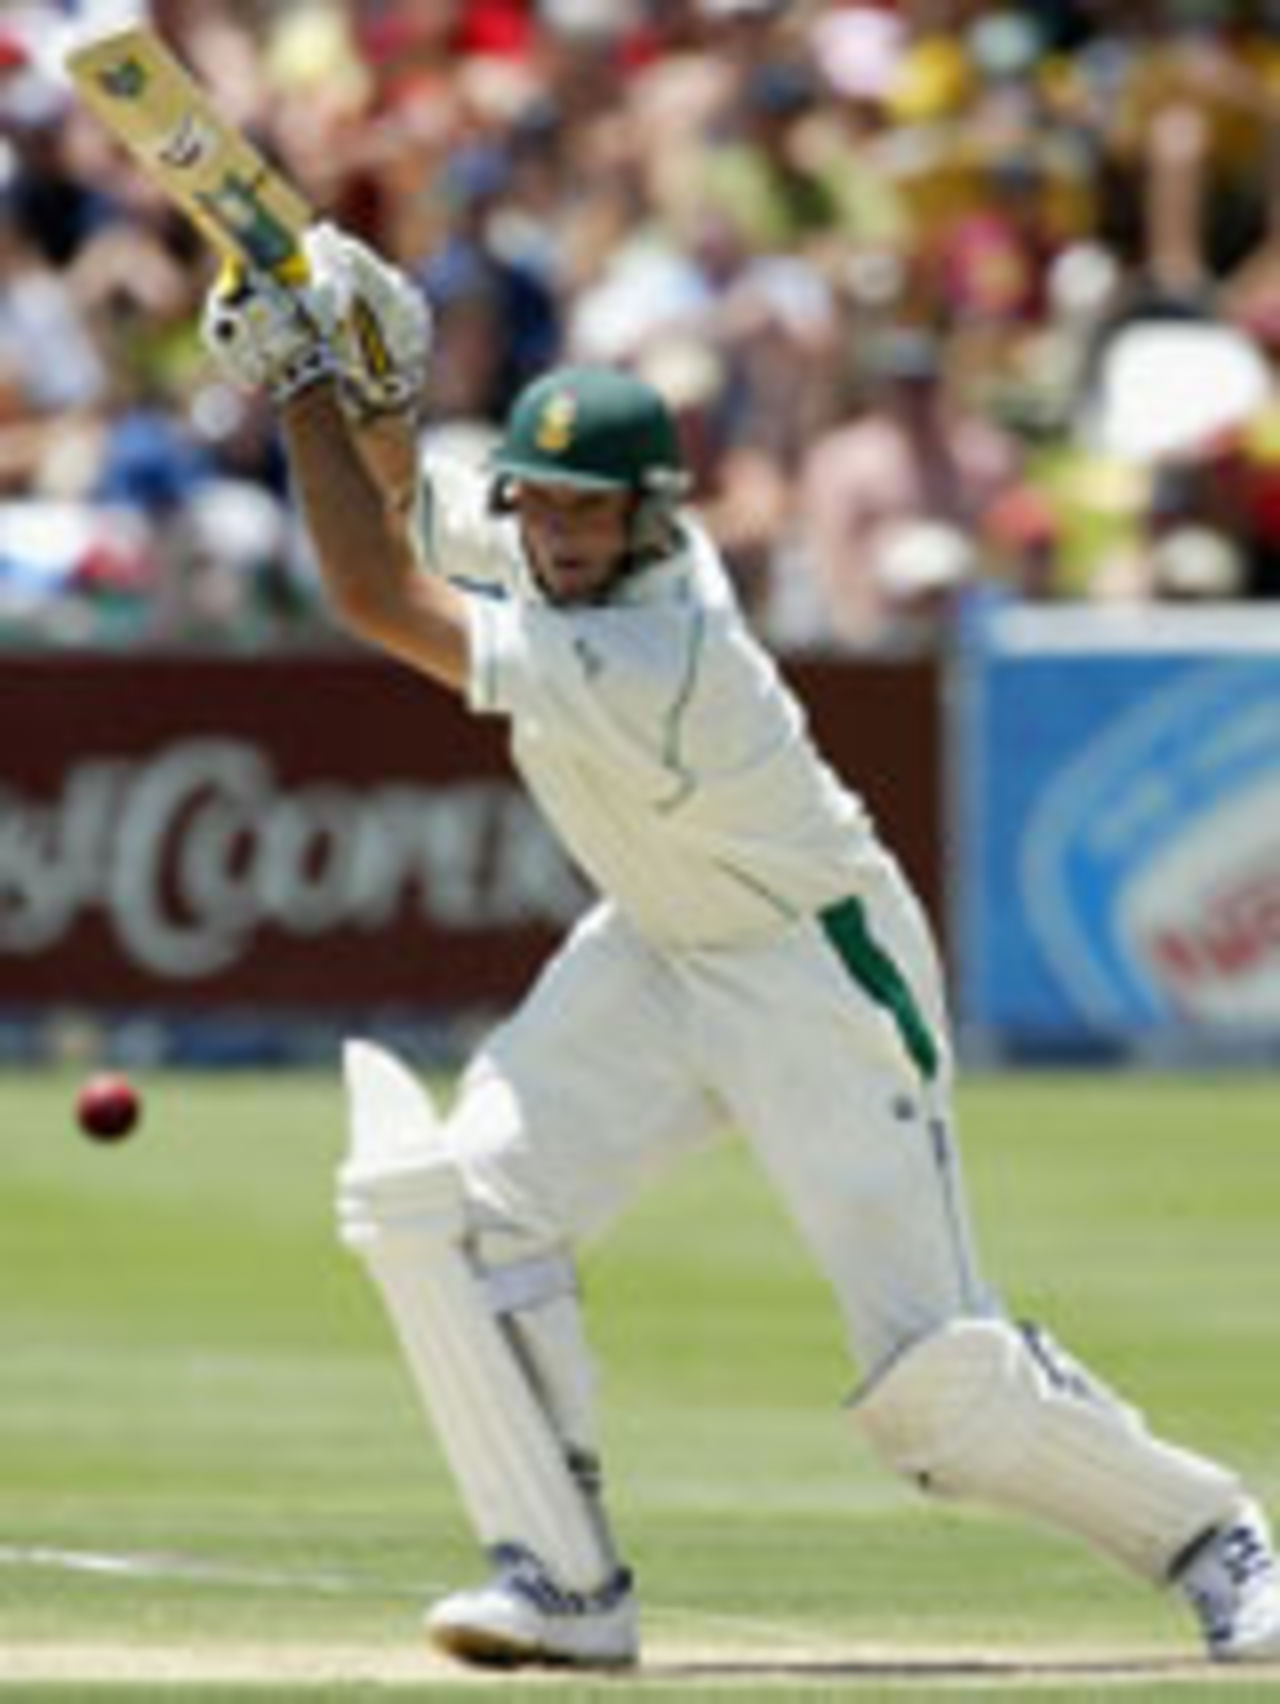 Graeme Smith batting, South Africa v West Indies, 3rd Test, Cape Town, January 2, 2004